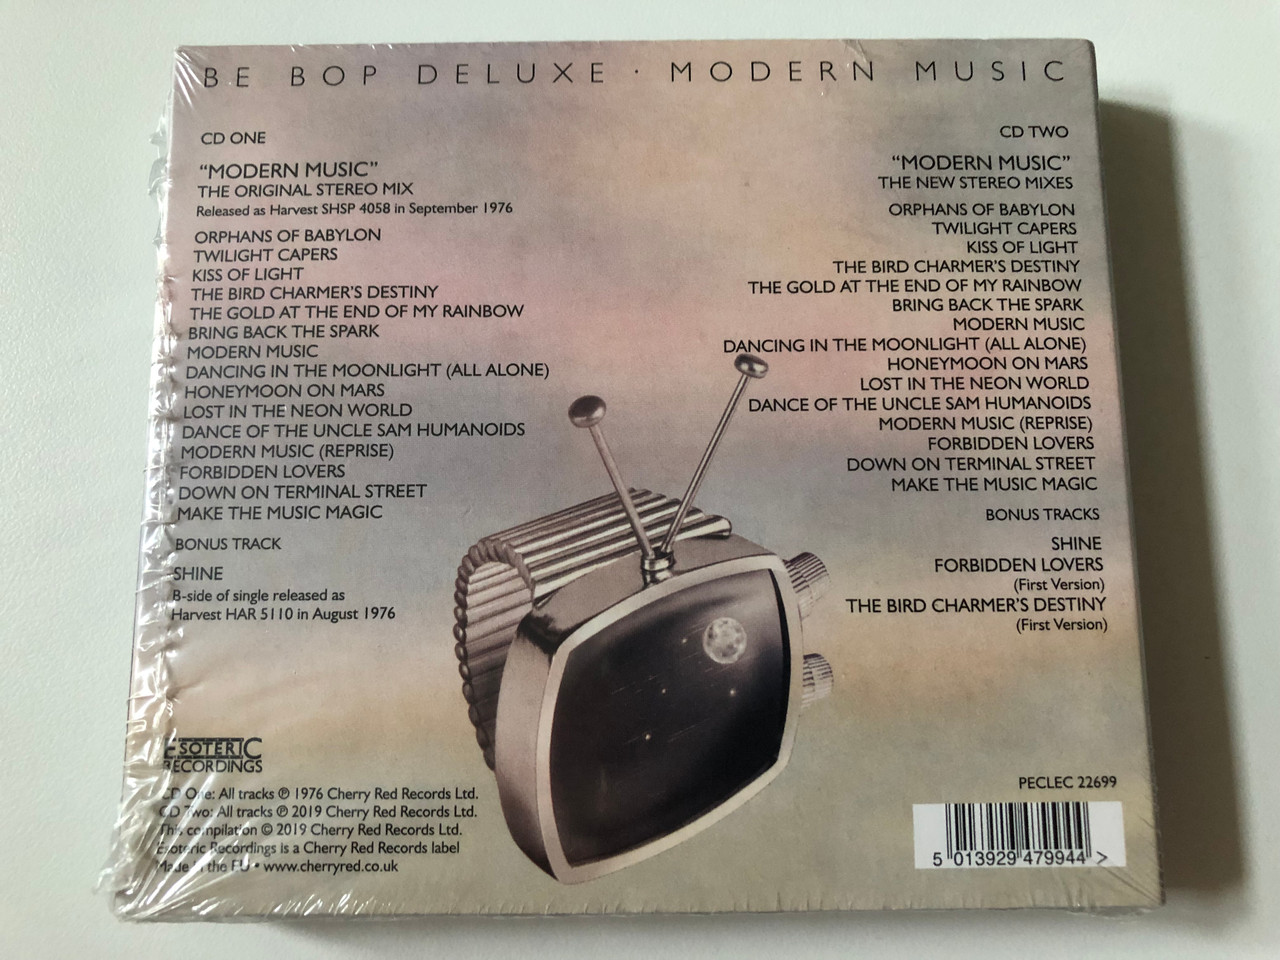 https://cdn10.bigcommerce.com/s-62bdpkt7pb/products/0/images/257764/Be_Bop_Deluxe_Modern_Music_A_new_CD_expanded_edition_of_this_classic_album_featuring_the_original_album_newly_remastered_from_the_original_Harvest_master_tapes_Esoteric_Recordings_2x_Aud__39134.1667551292.1280.1280.JPG?c=2&_gl=1*1aw9edo*_ga*MjA2NTIxMjE2MC4xNTkwNTEyNTMy*_ga_WS2VZYPC6G*MTY2NzU0NTYyOS42MTcuMS4xNjY3NTUxMjkzLjYwLjAuMA..